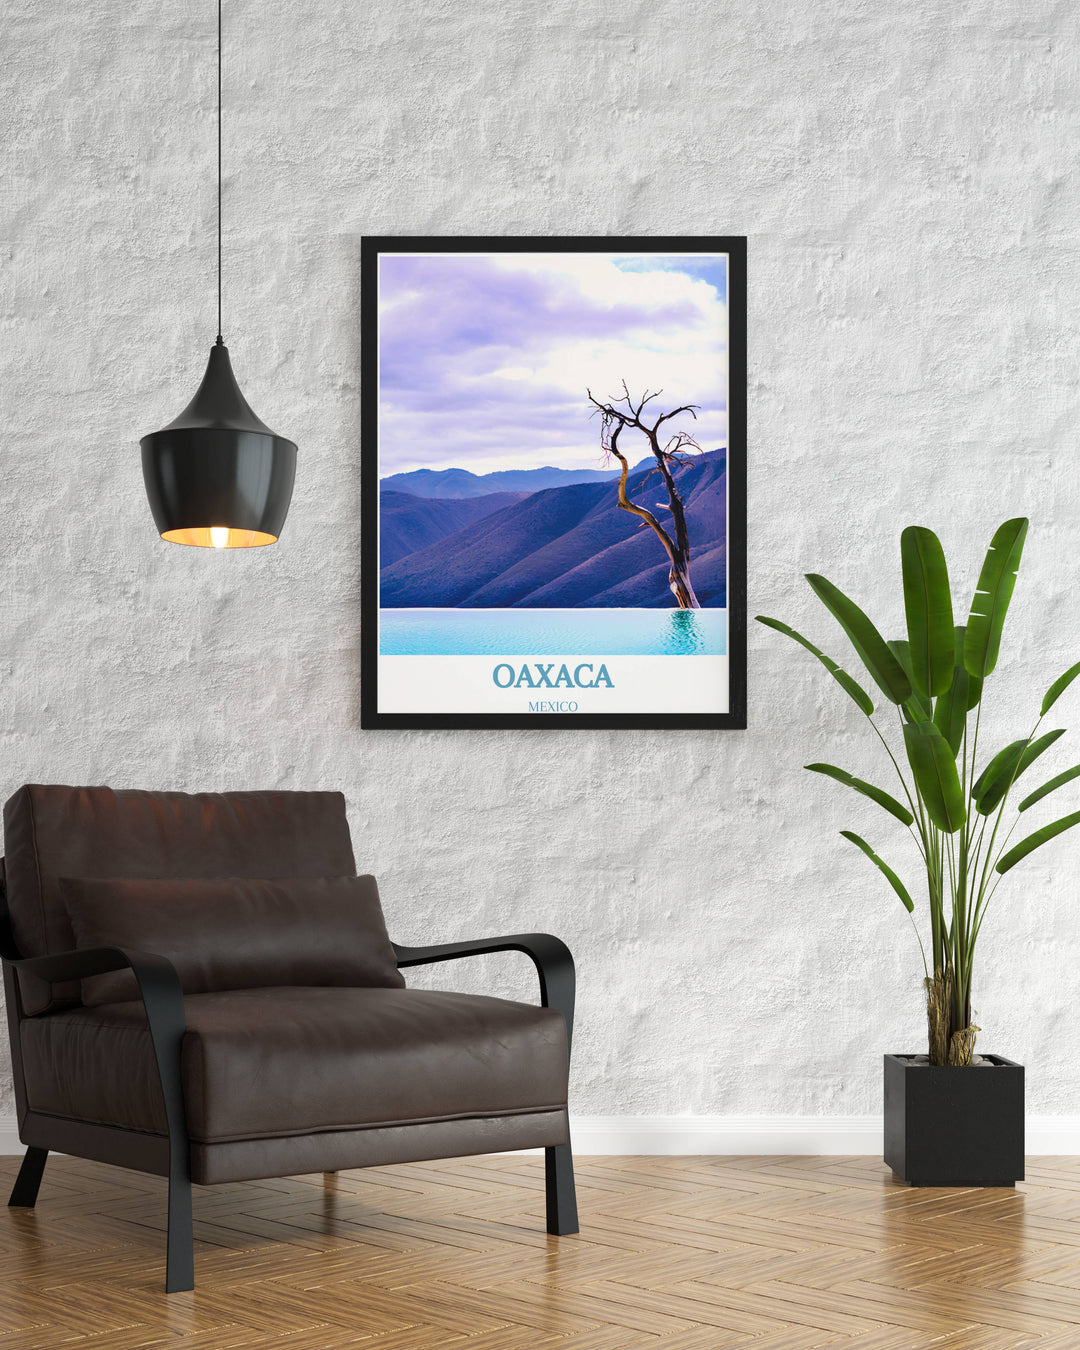 Wall art featuring the iconic views of Hierve el Agua, blending natural beauty with artistic flair.